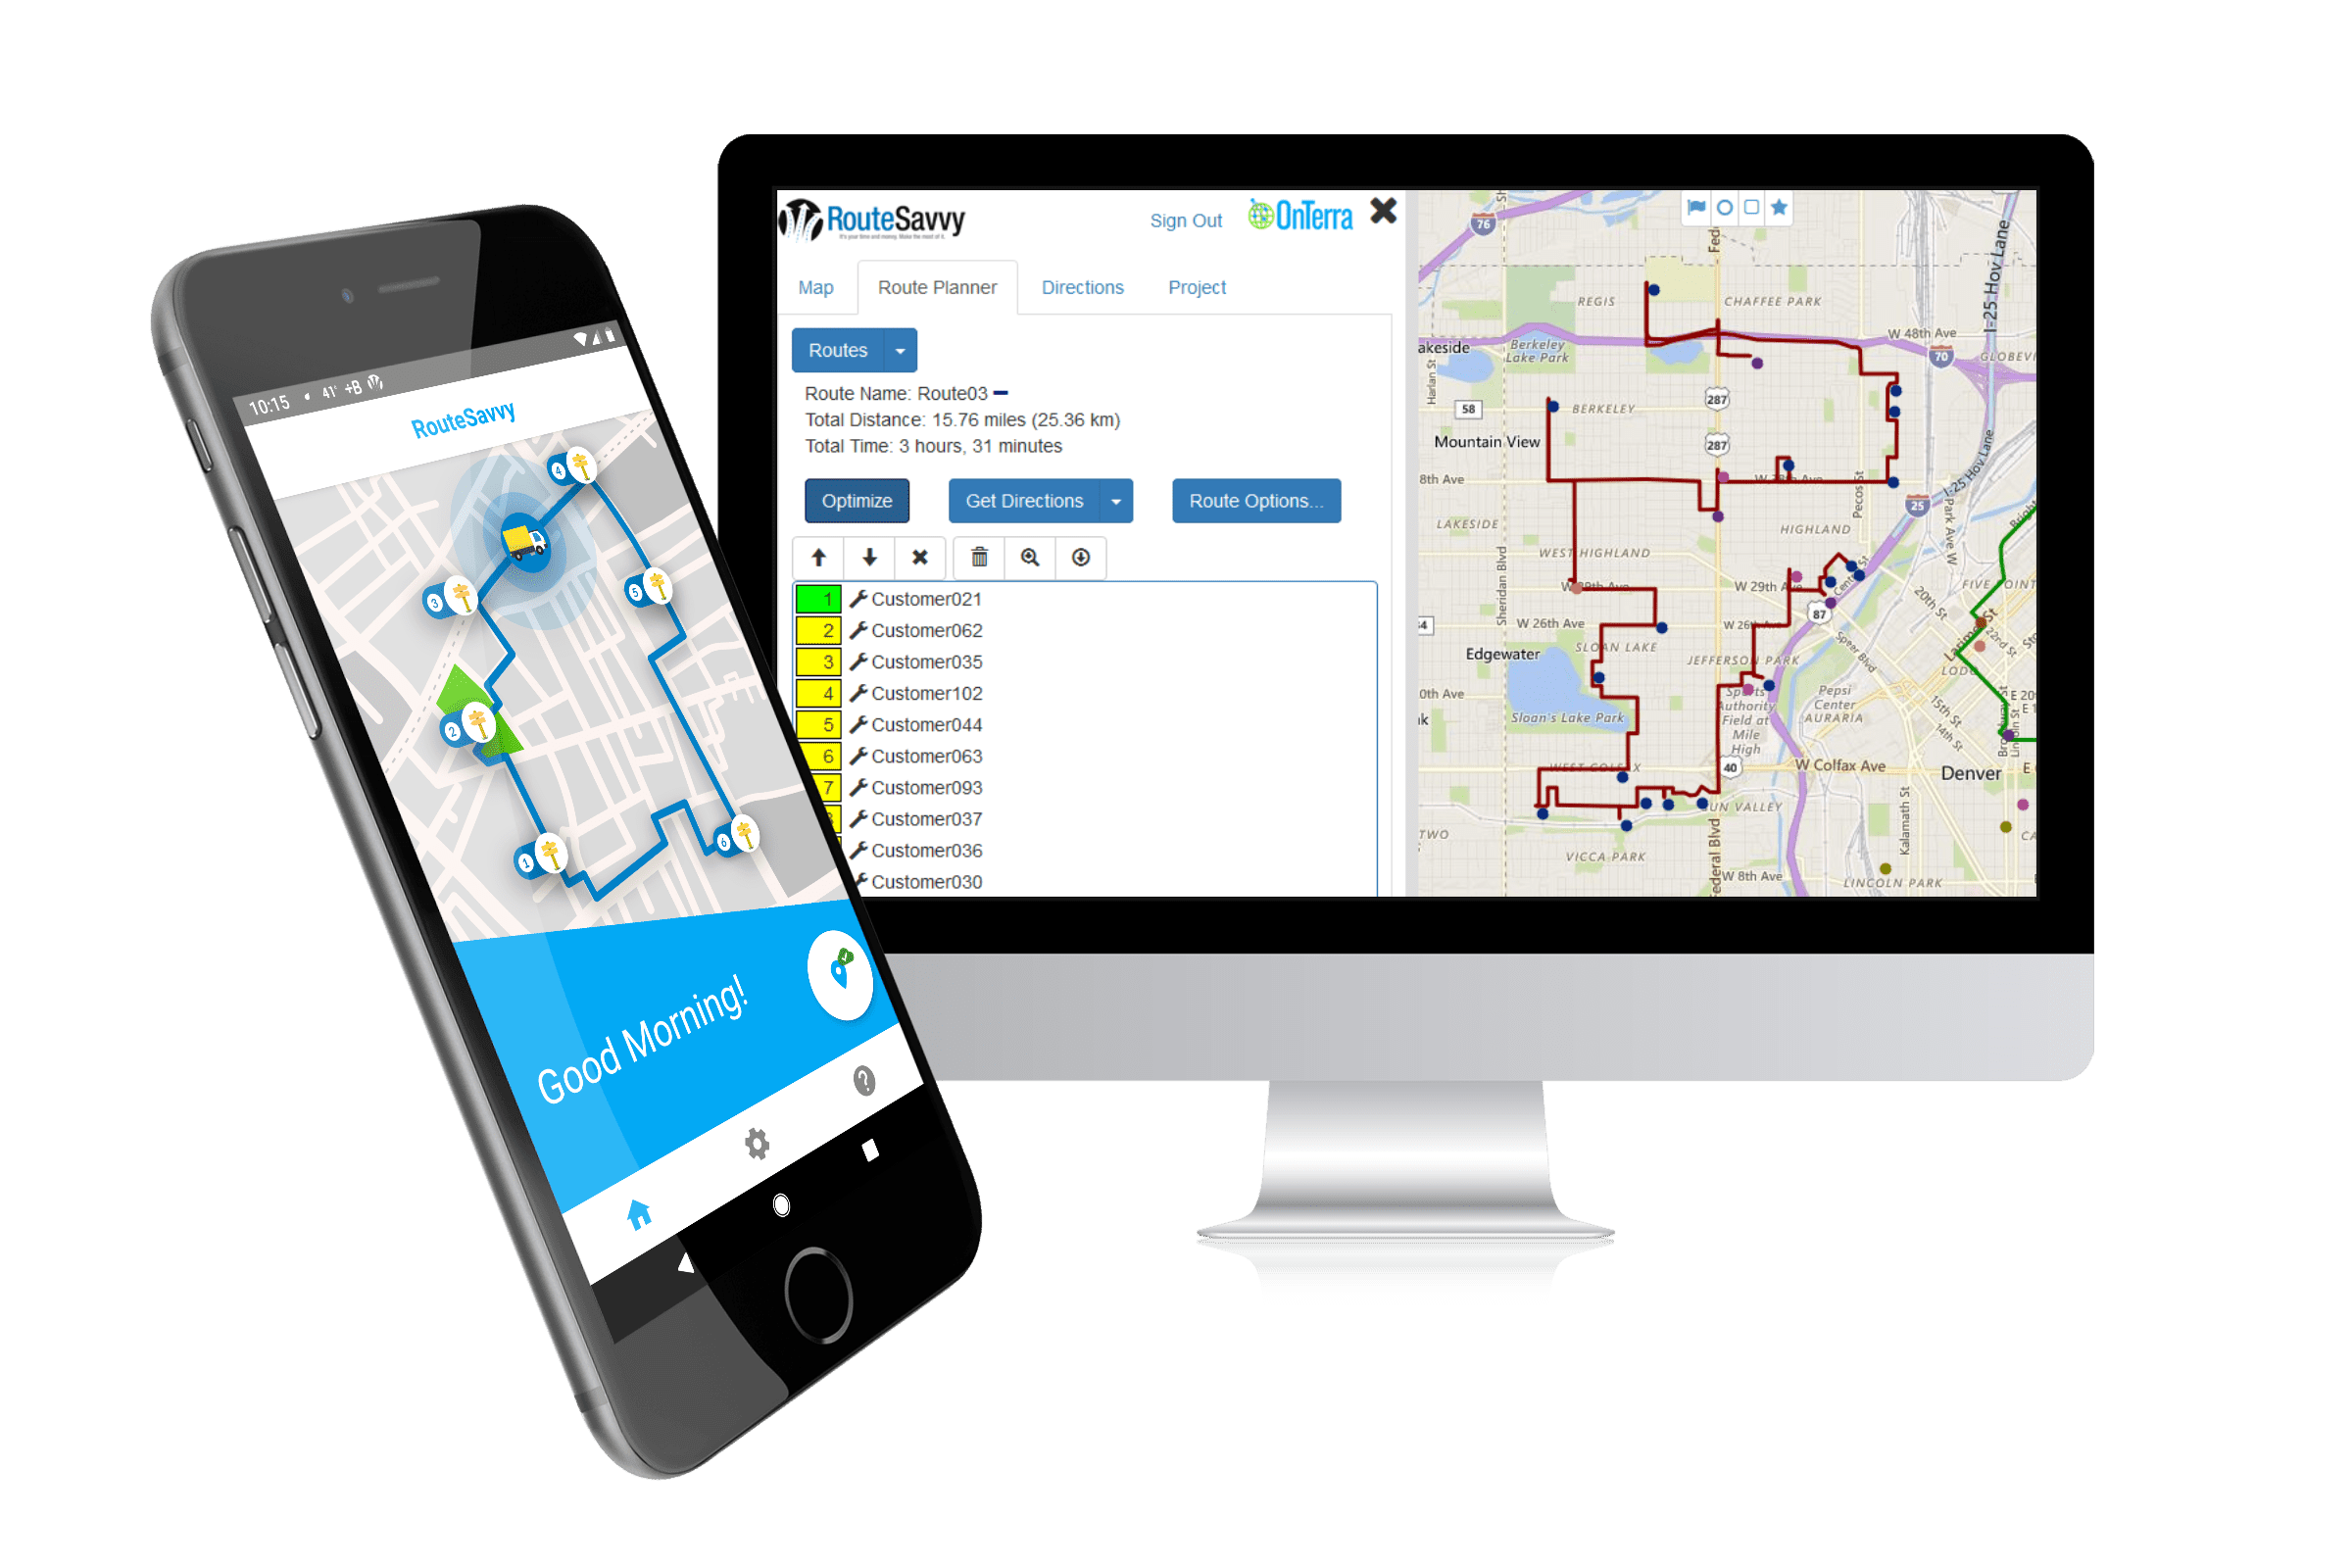 Route Planner. Route planning